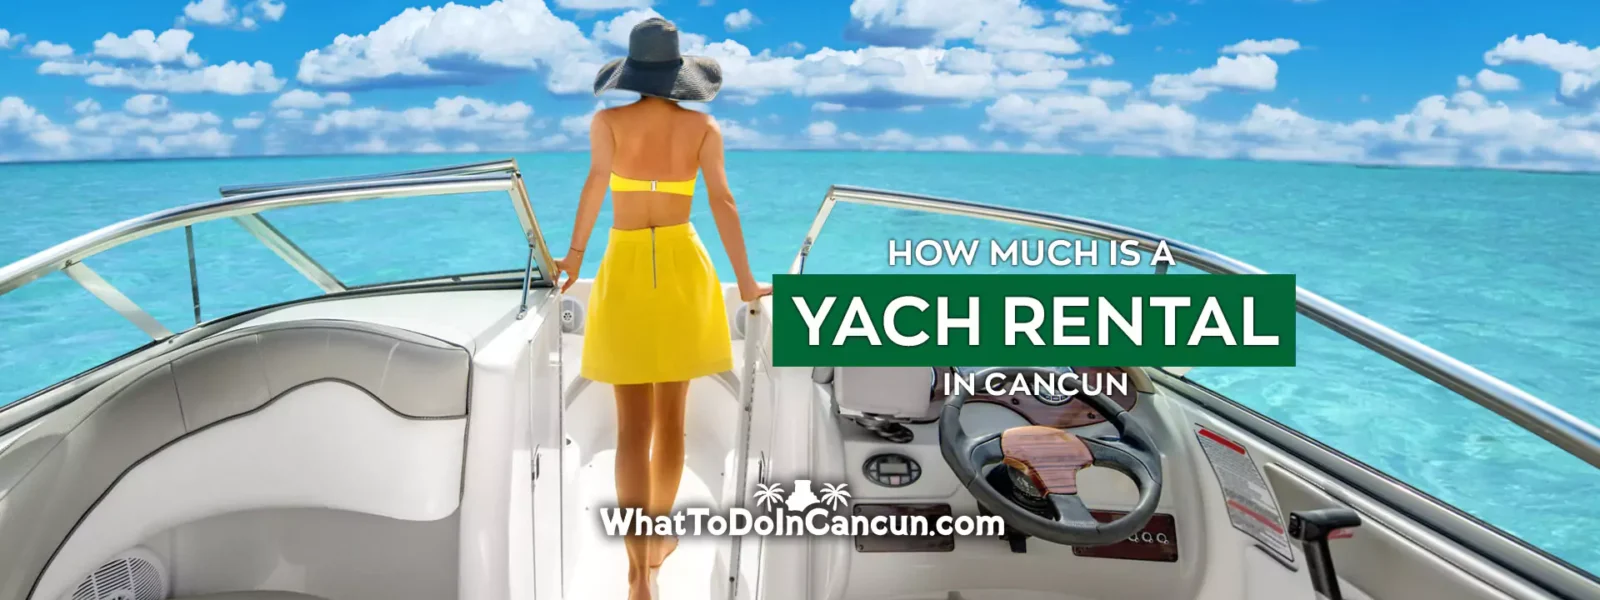 how-much-is-a-yacht-rental-in-cancun